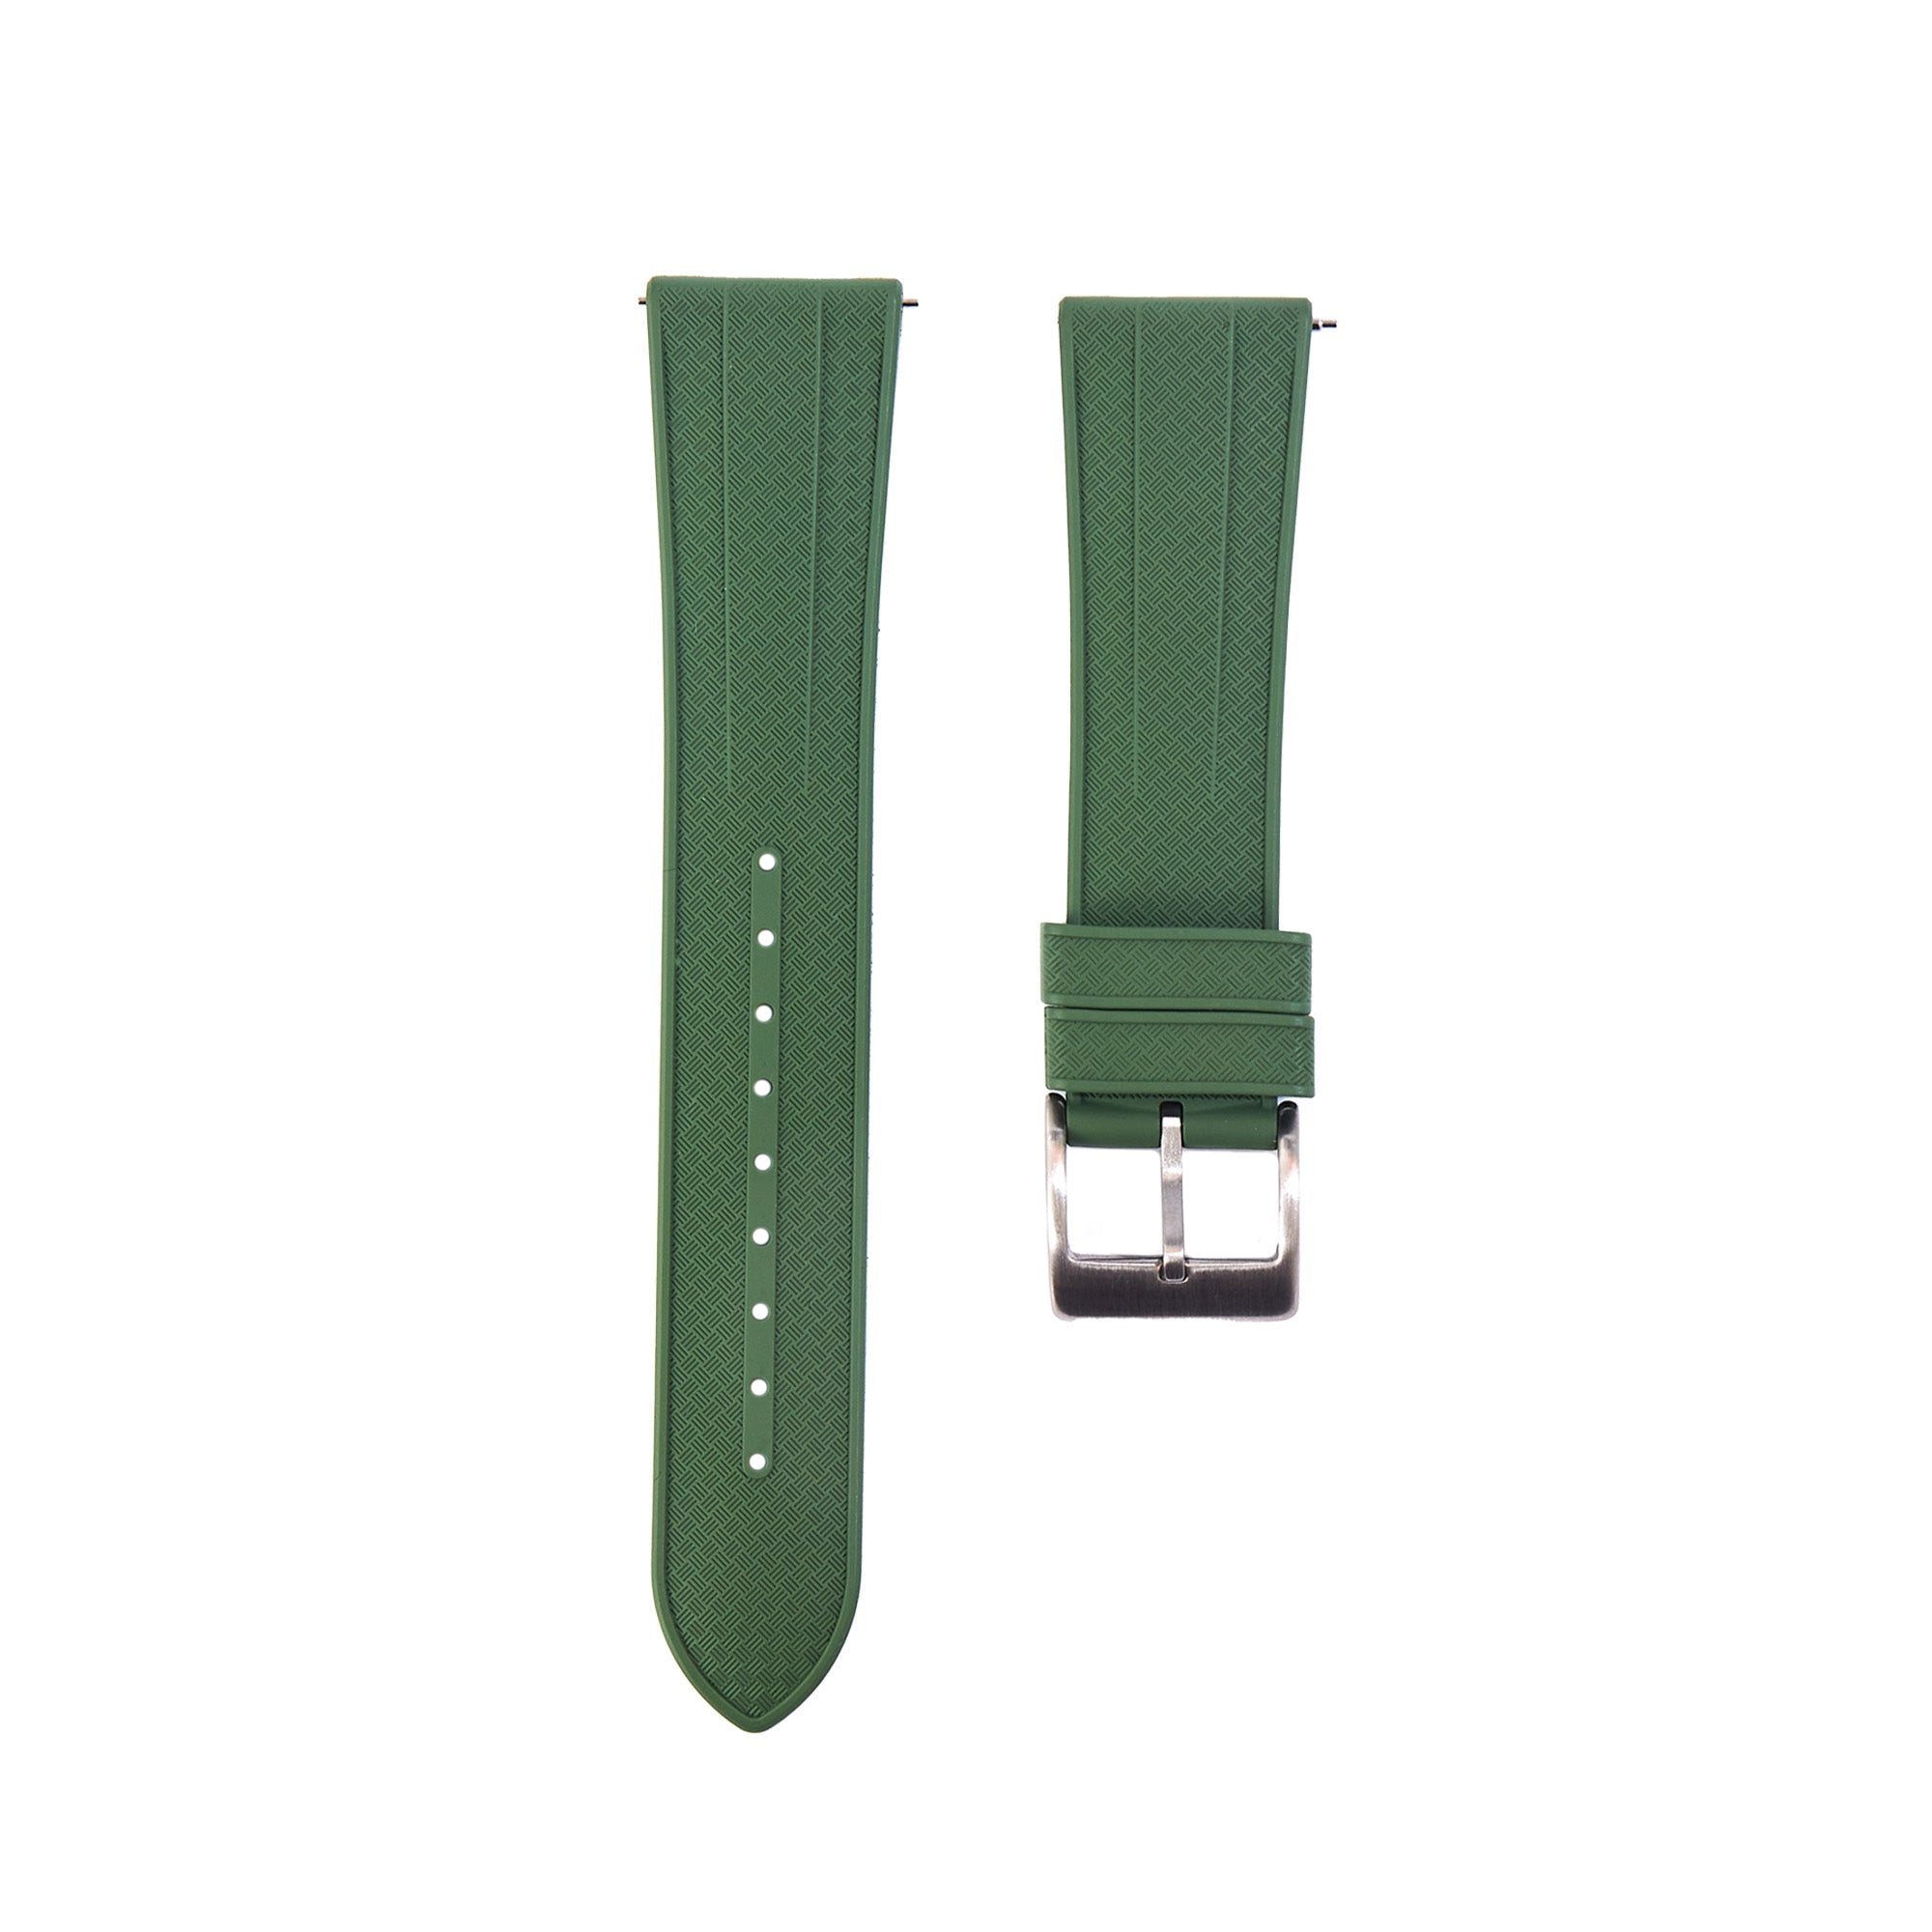 Grid FKM Rubber Strap - Quick-Release - Compatible with Blancpain x Swatch - Army Green (2412) -StrapSeeker